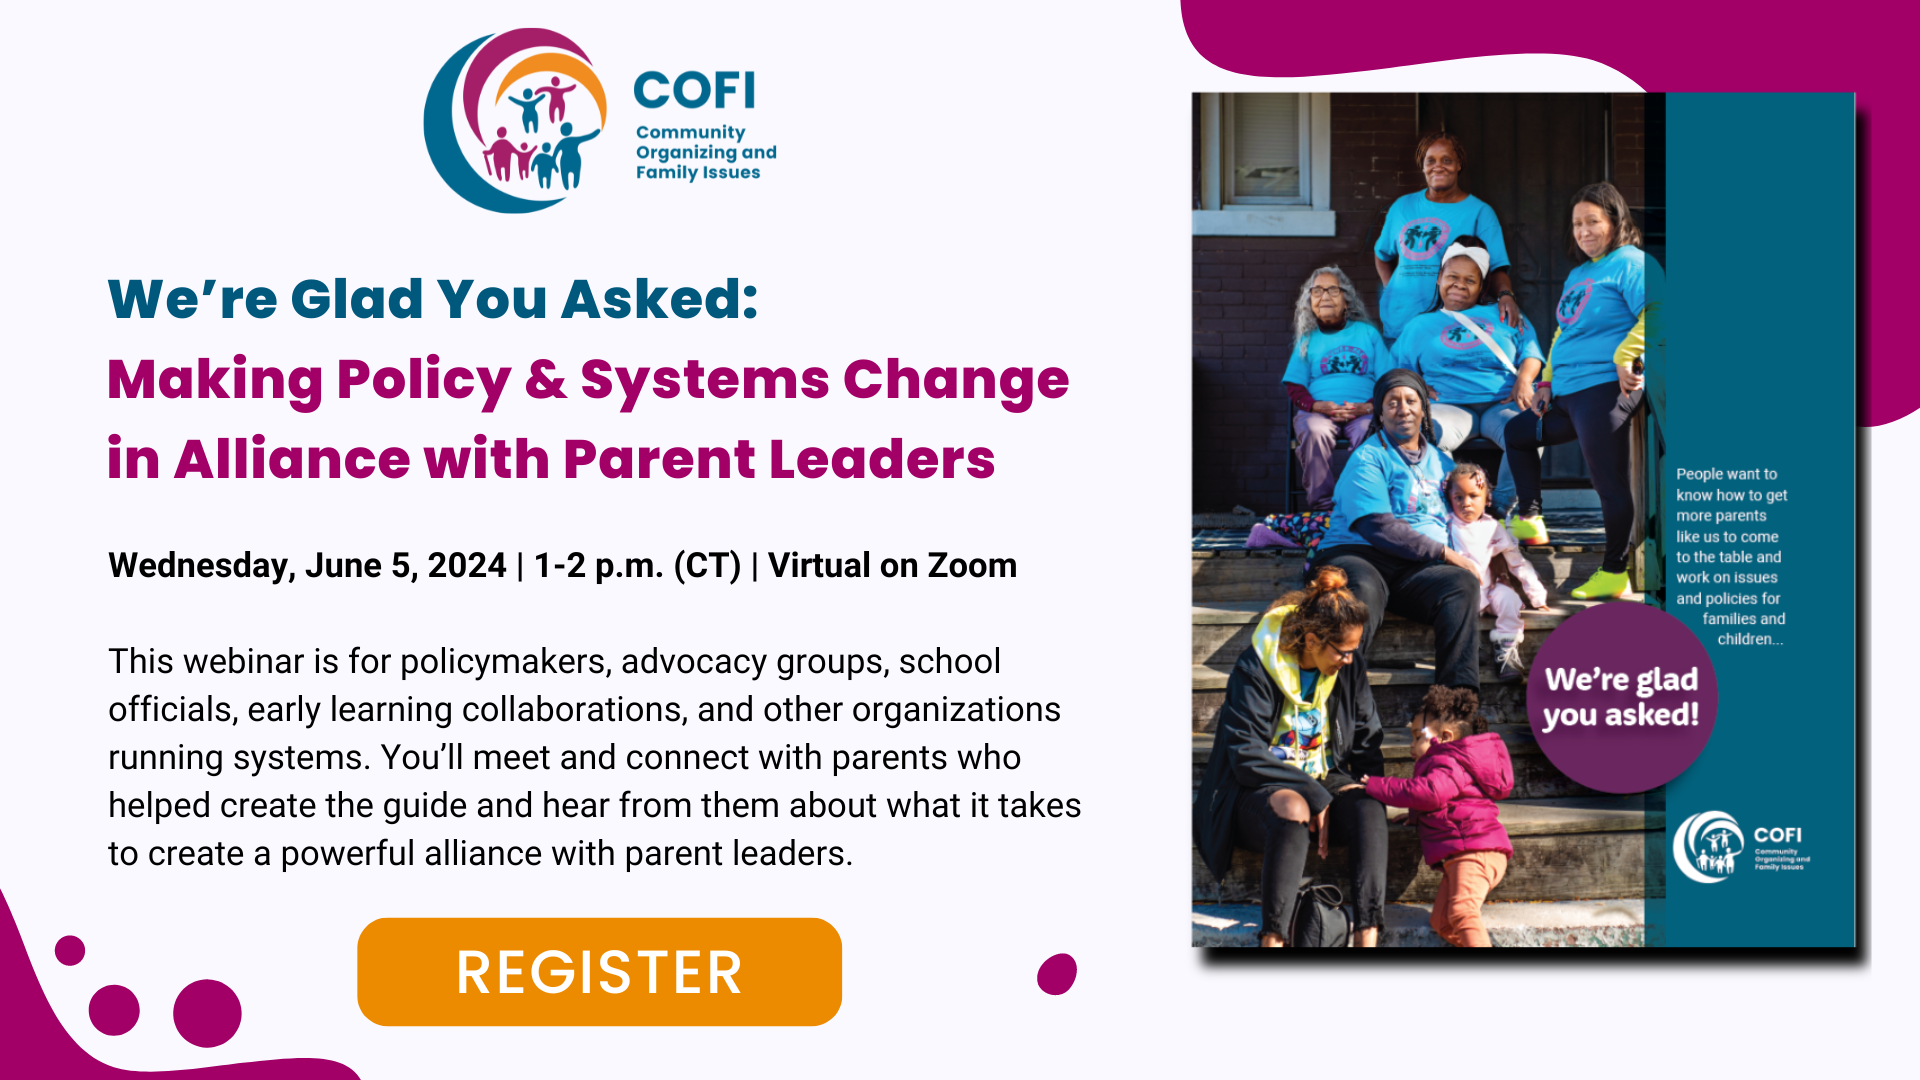 A graphic promoting a webinar that reads "We’re Glad You Asked: Making Policy & Systems Change in Alliance with Parent Leaders, Wednesday, June 5, 2024, 1-2 PM, Virtual on Zoom." The event description reads, "This webinar is for policymakers, advocacy groups, school officials, early learning collaborations, and other organizations running systems. You’ll meet and connect with parents who helped create the guide and hear from them about what it takes to create a powerful alliance with parent leaders."